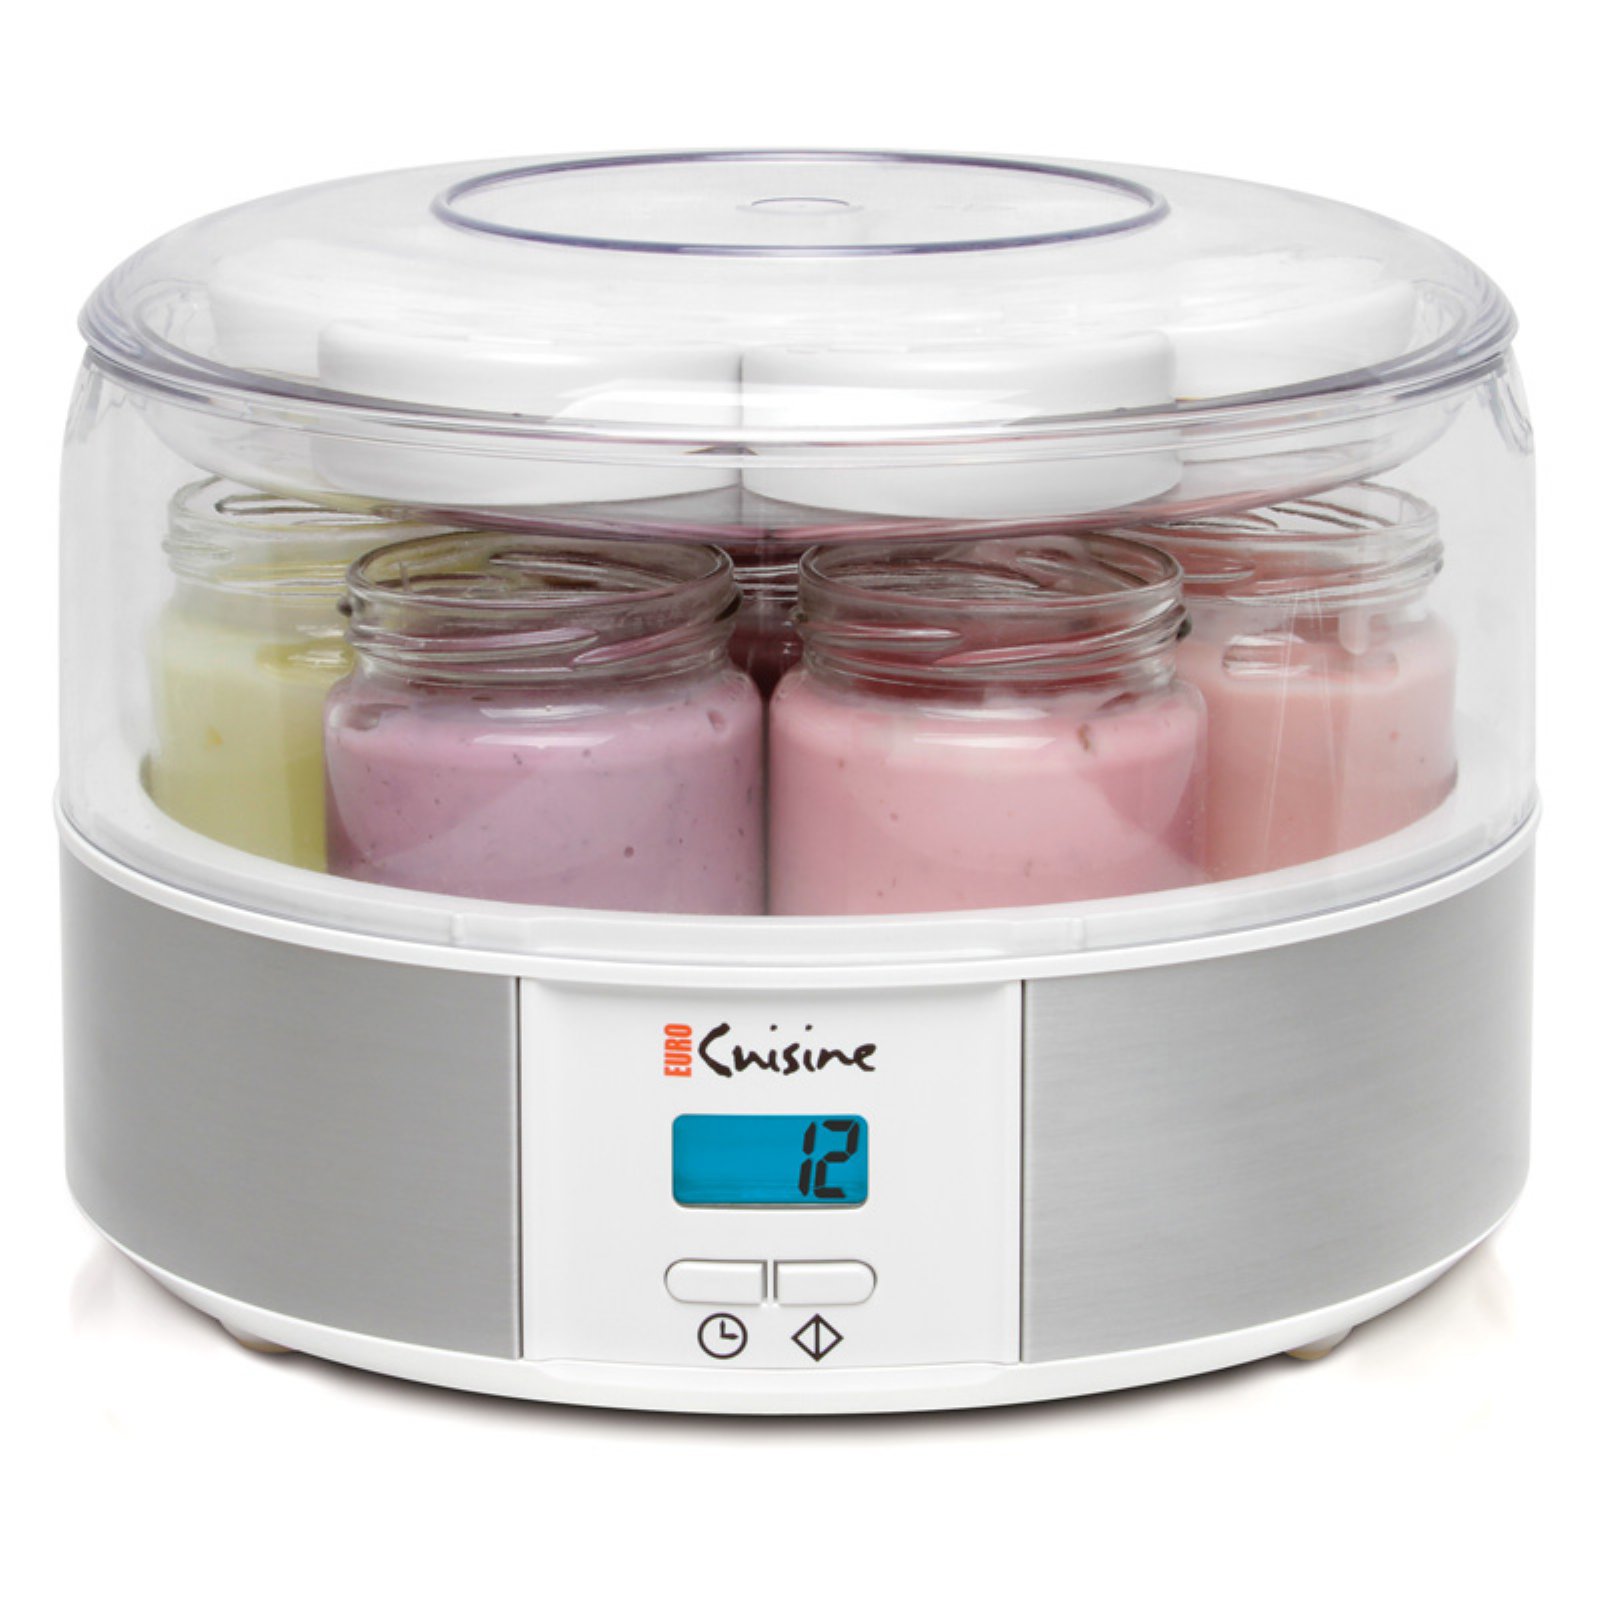 Euro Cuisine YMX650 Digital Yogurt Maker with 7 Glass Jars and 15 hours Timer - image 4 of 4